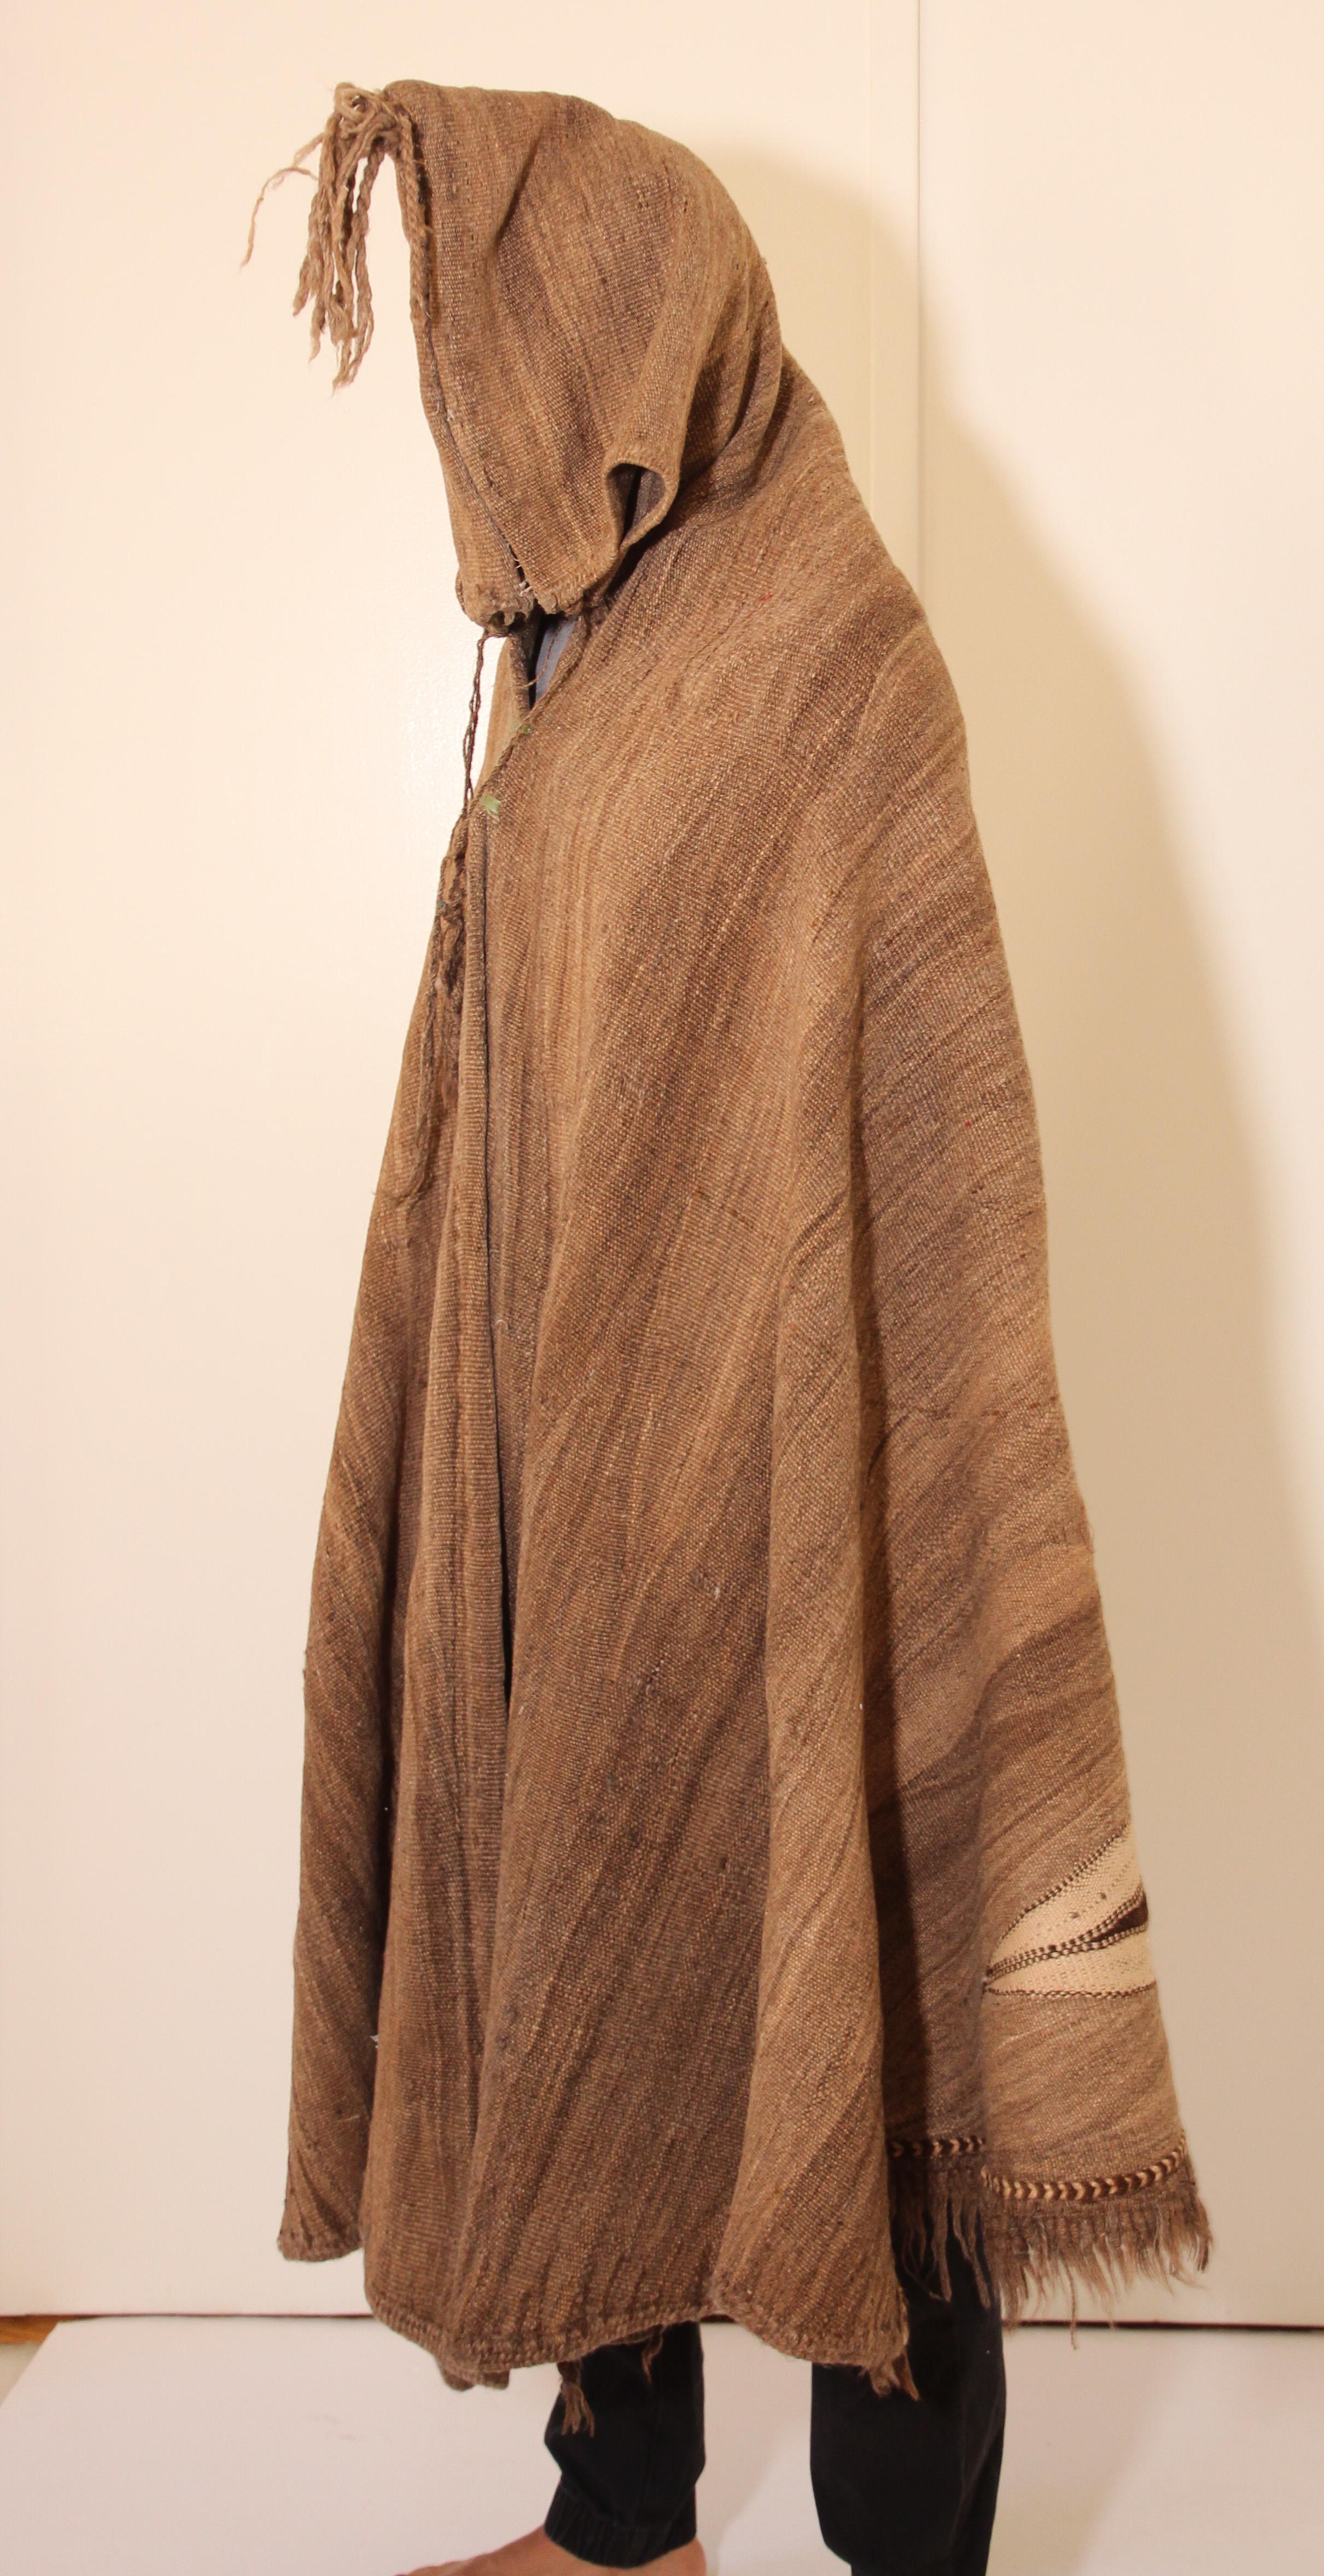 Berber Tribal North Africa Moroccan Burnous Wool Cape For Sale 2